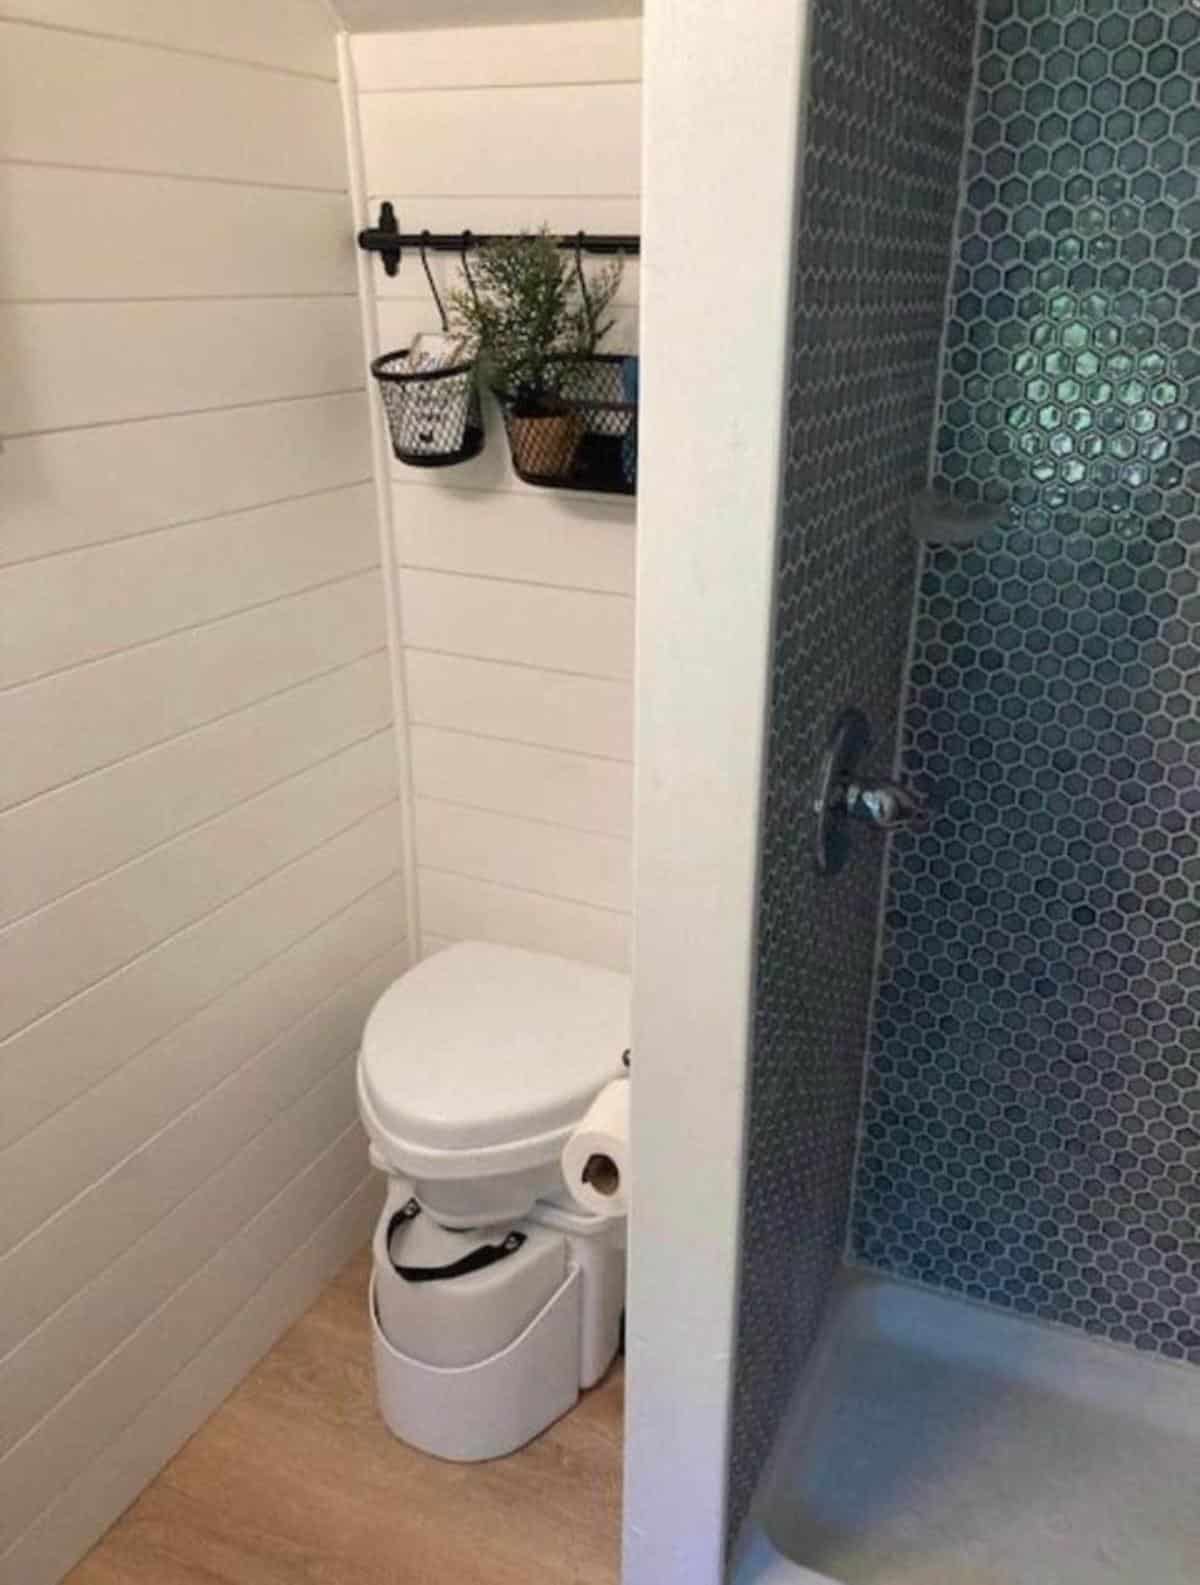 composting toilet and full length shower area in bathroom of offgrid skoolie home